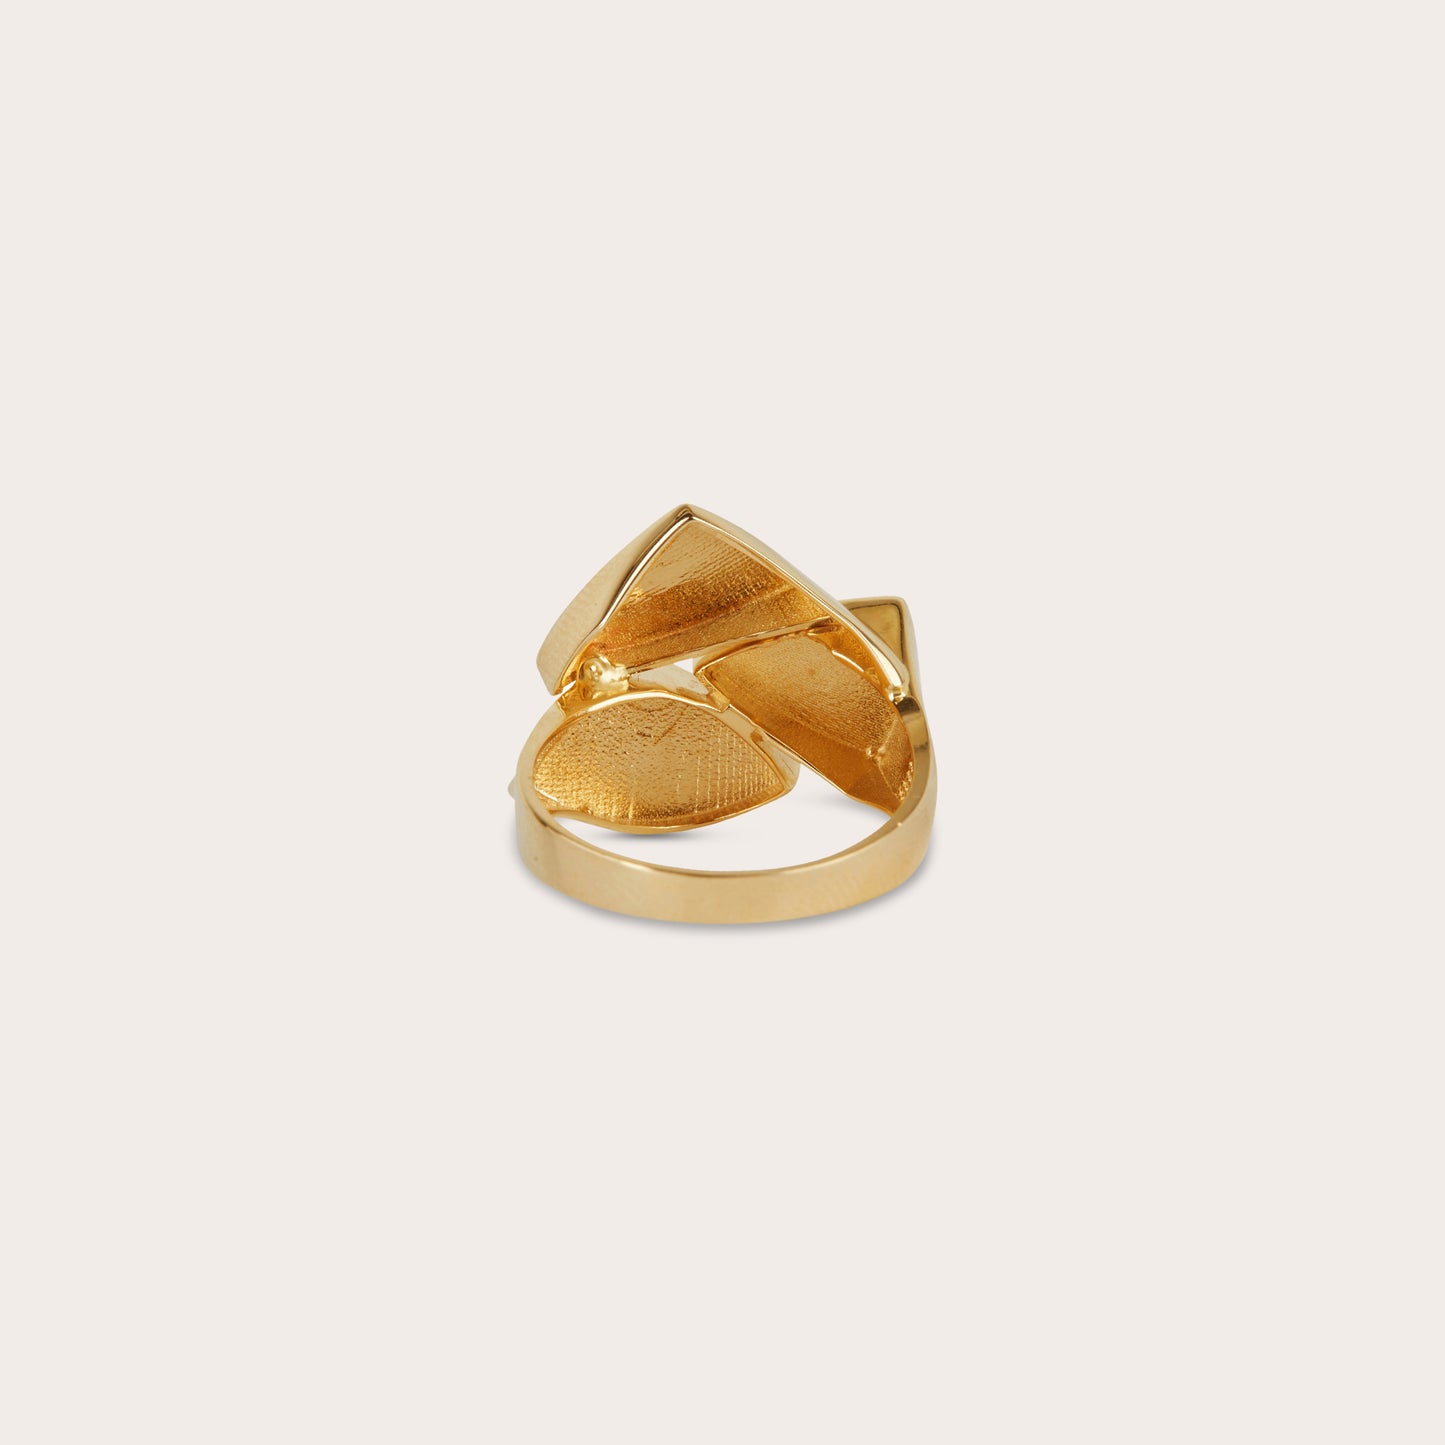 Triangle ring 14ct gold